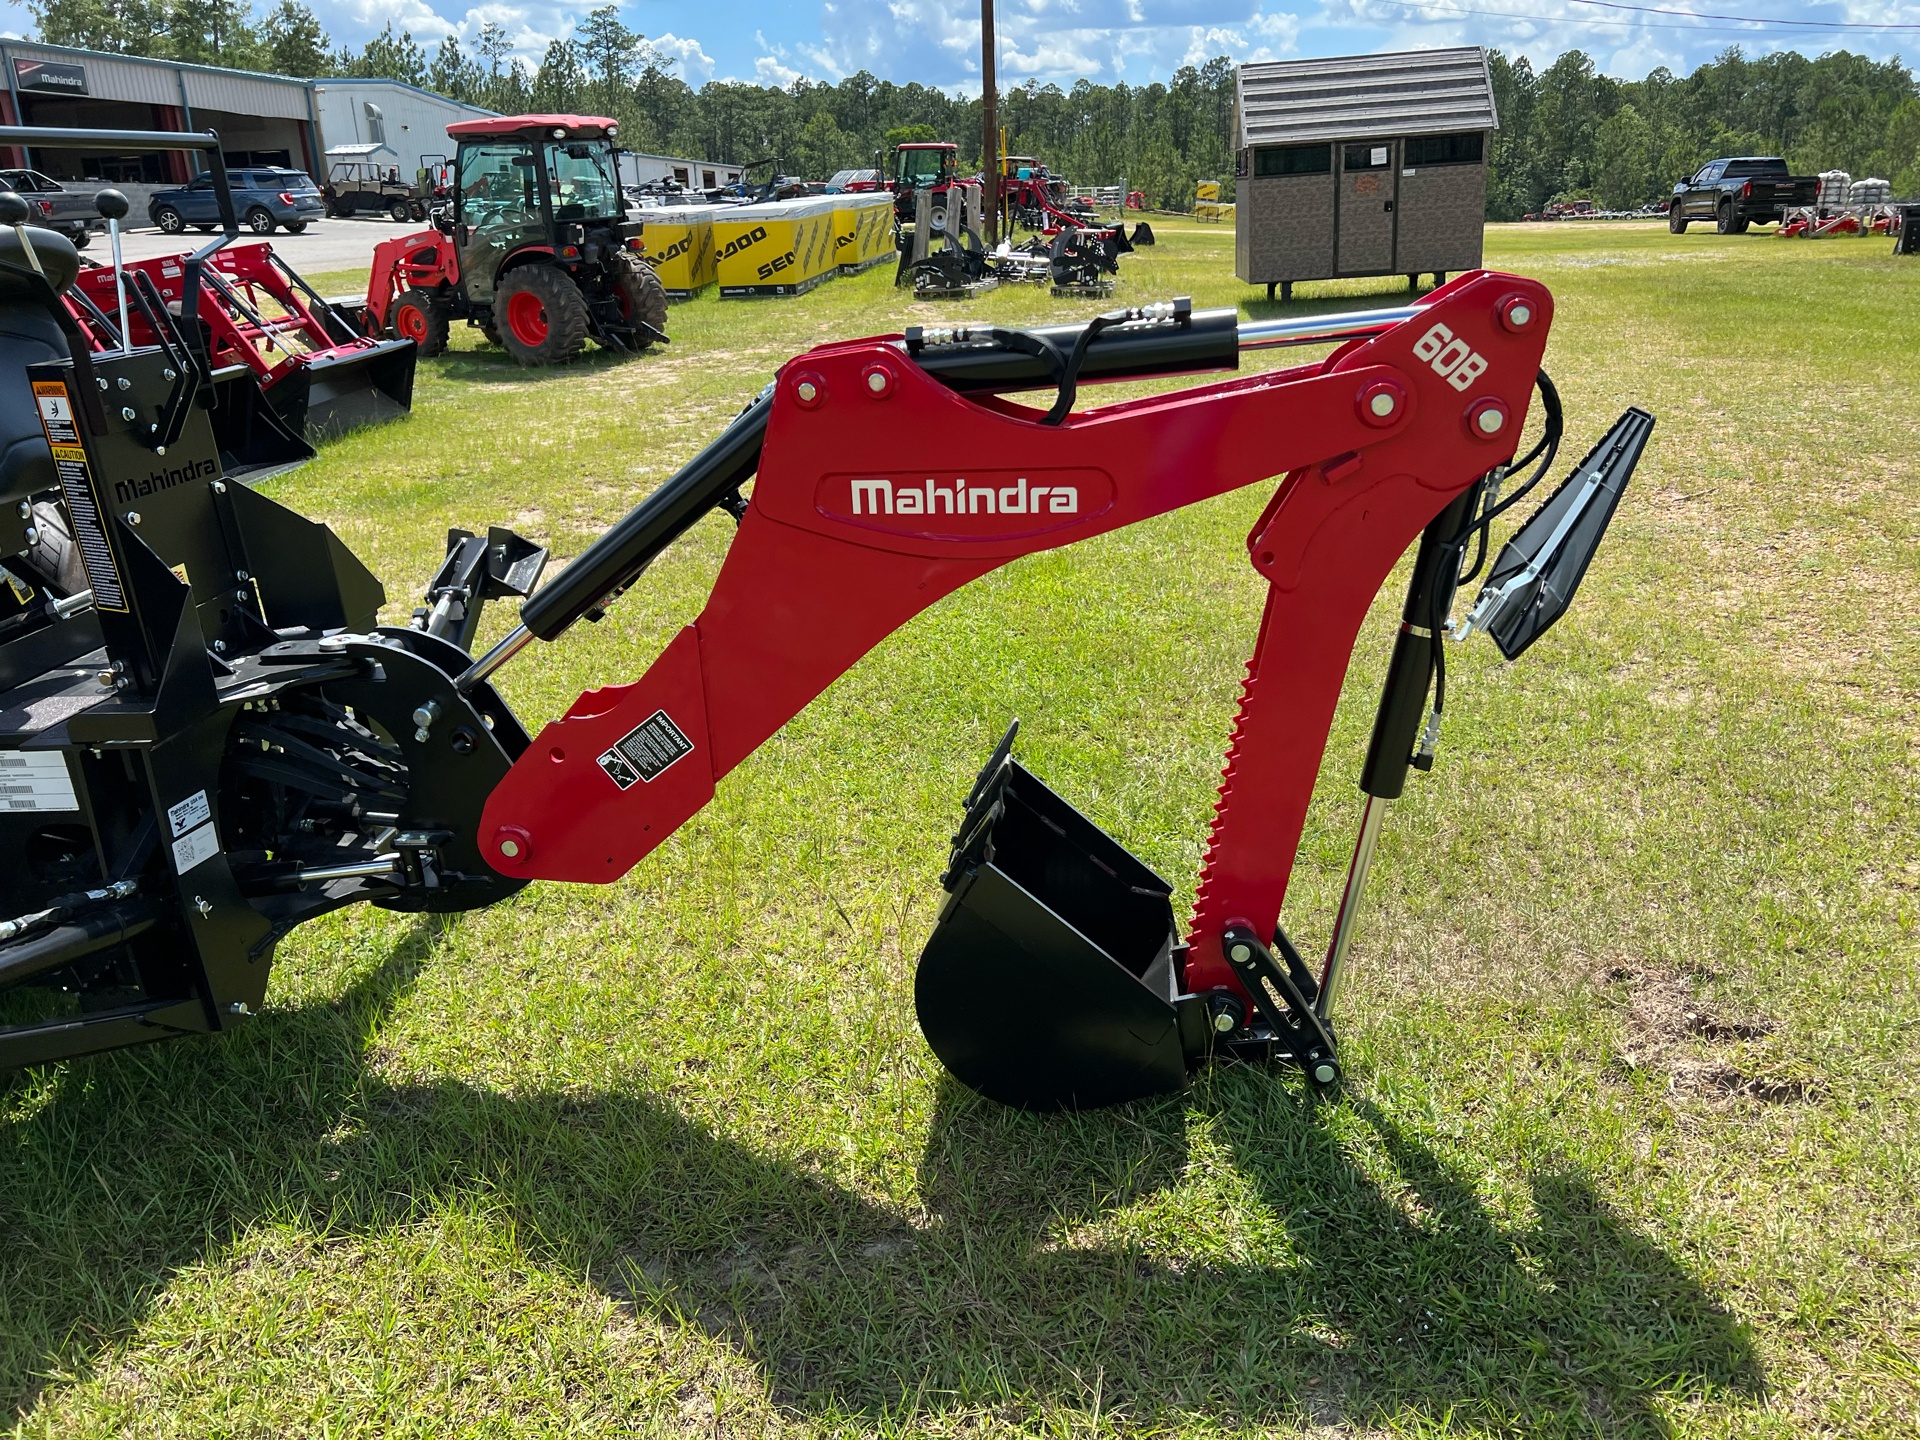 2023 Mahindra 2638 HST in Saucier, Mississippi - Photo 2